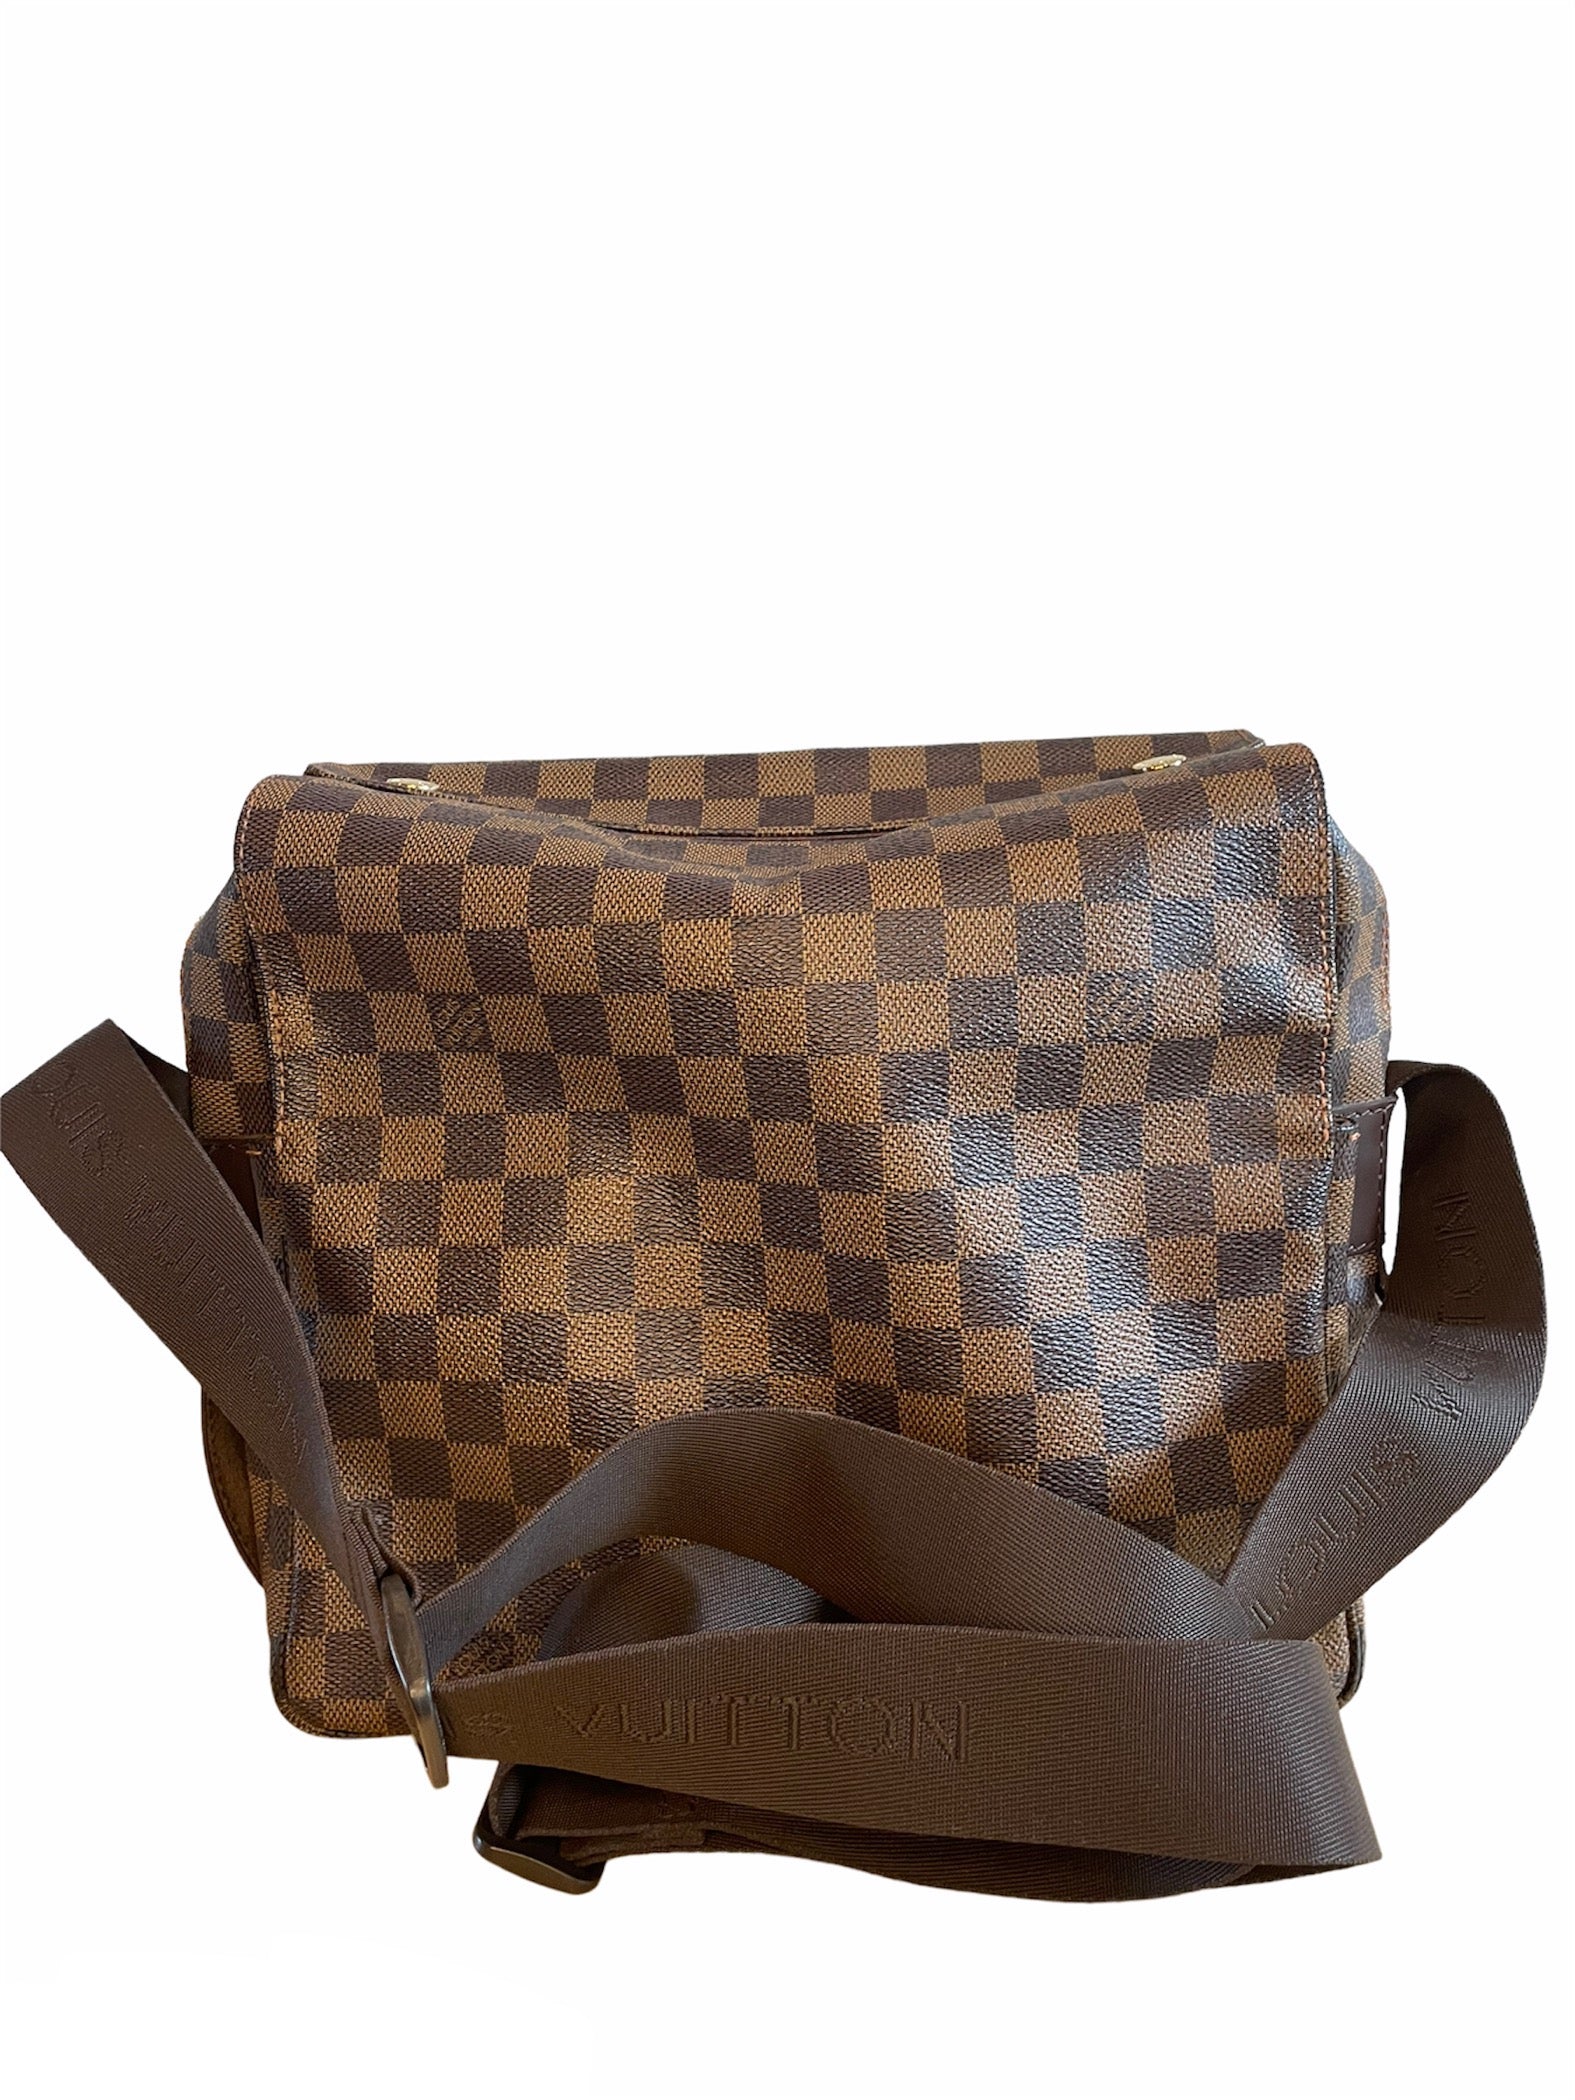 Louis Vuitton Naviglio Messenger Bag (pre-owned), Crossbody Bags, Clothing & Accessories